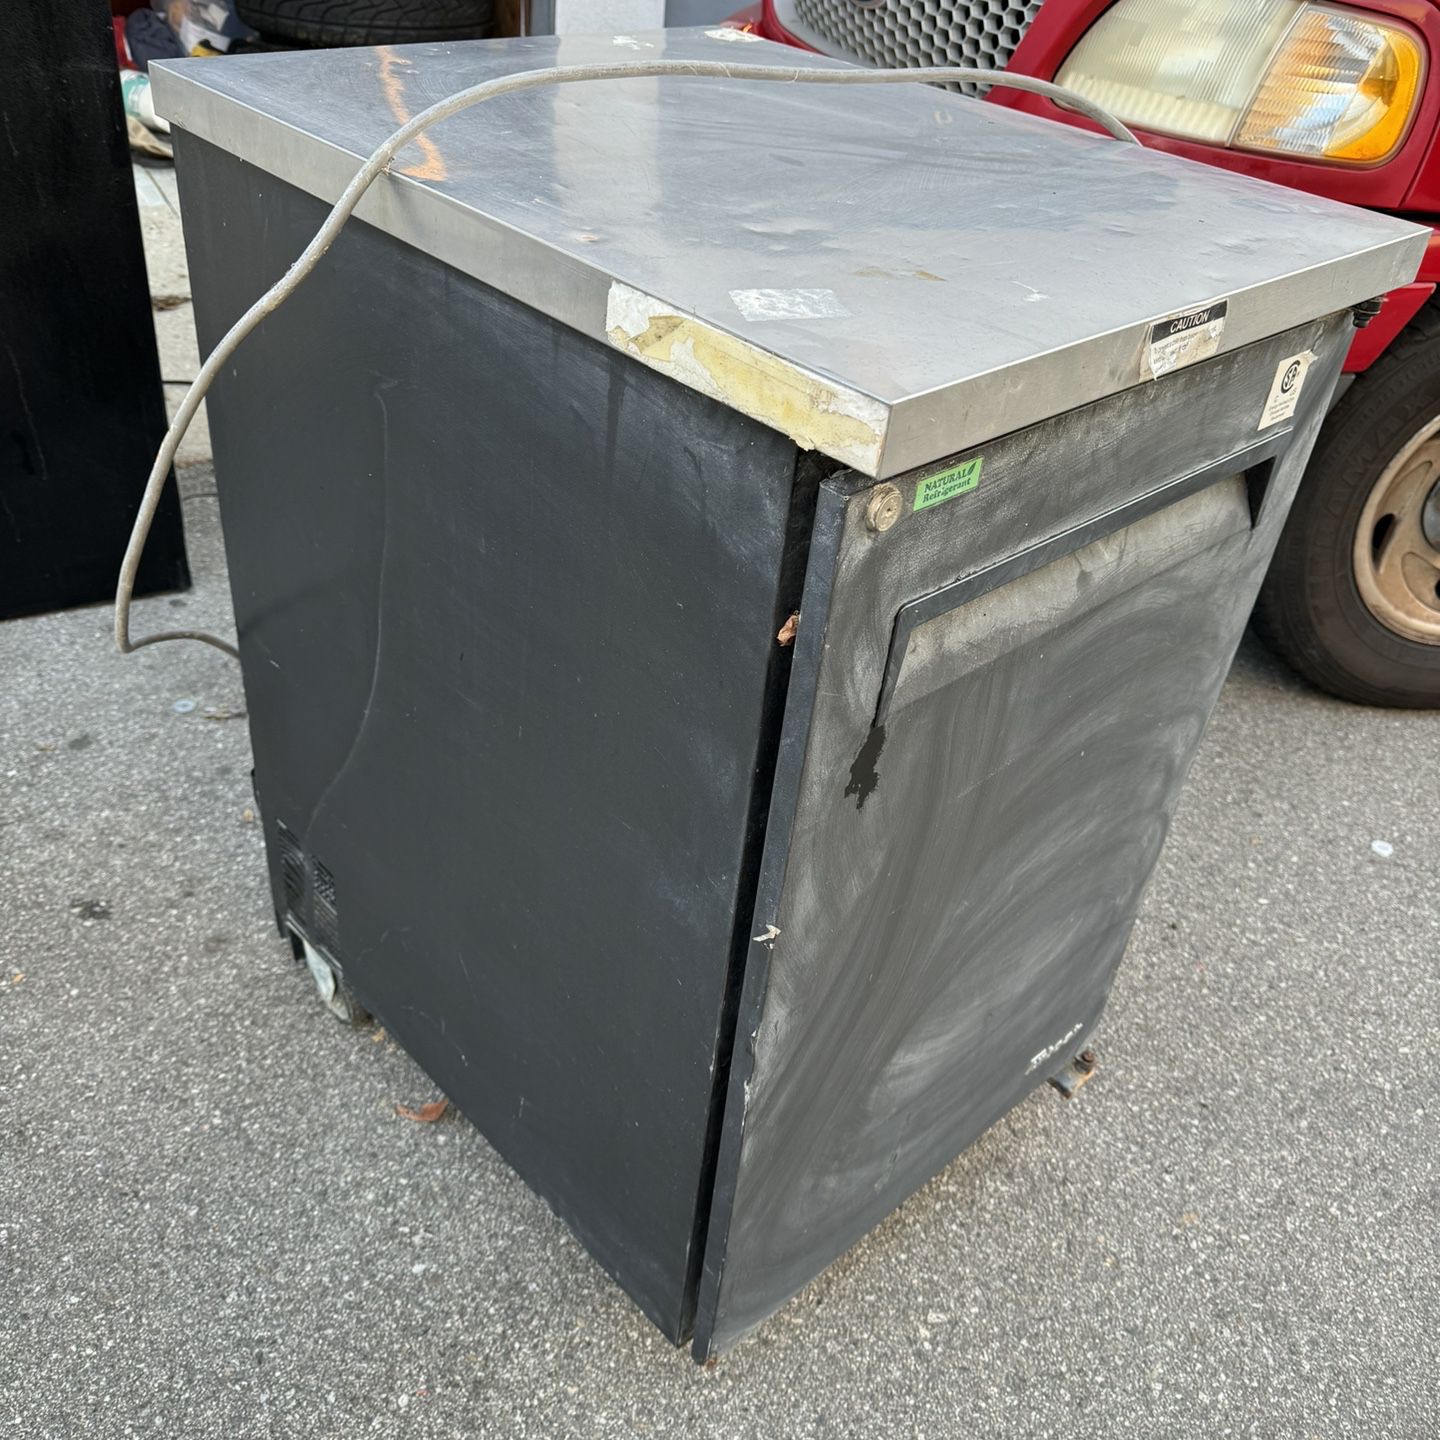 Turbo Air Commercial Refrigerator - Great Condition!